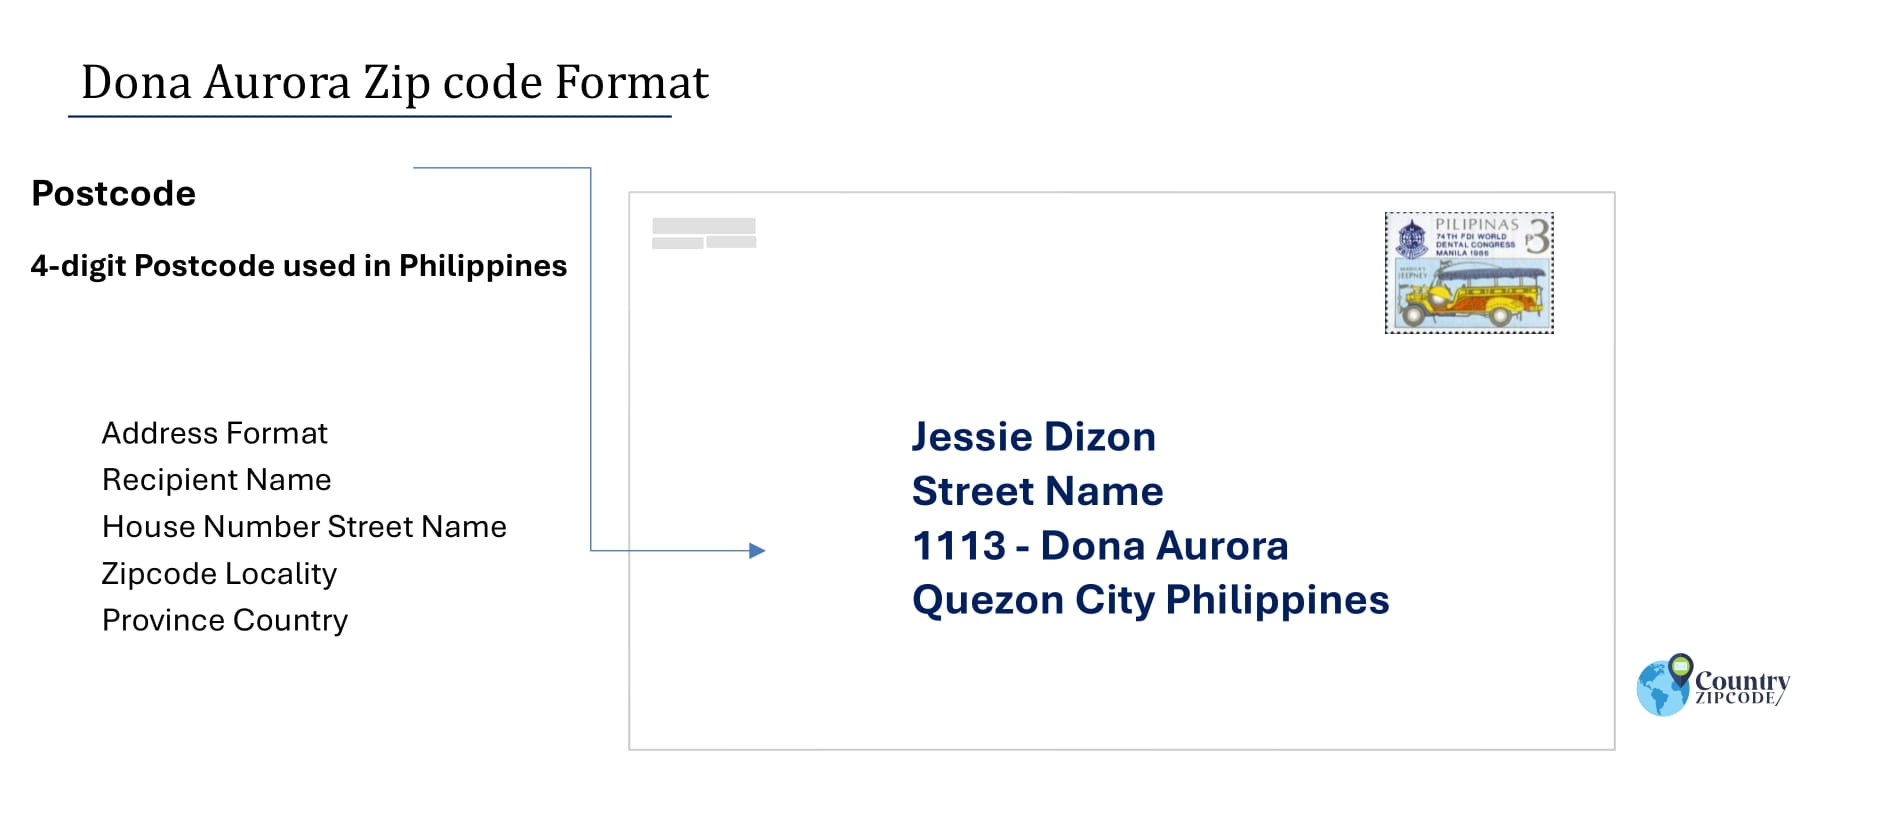 example of Dona Aurora Philippines zip code and address format